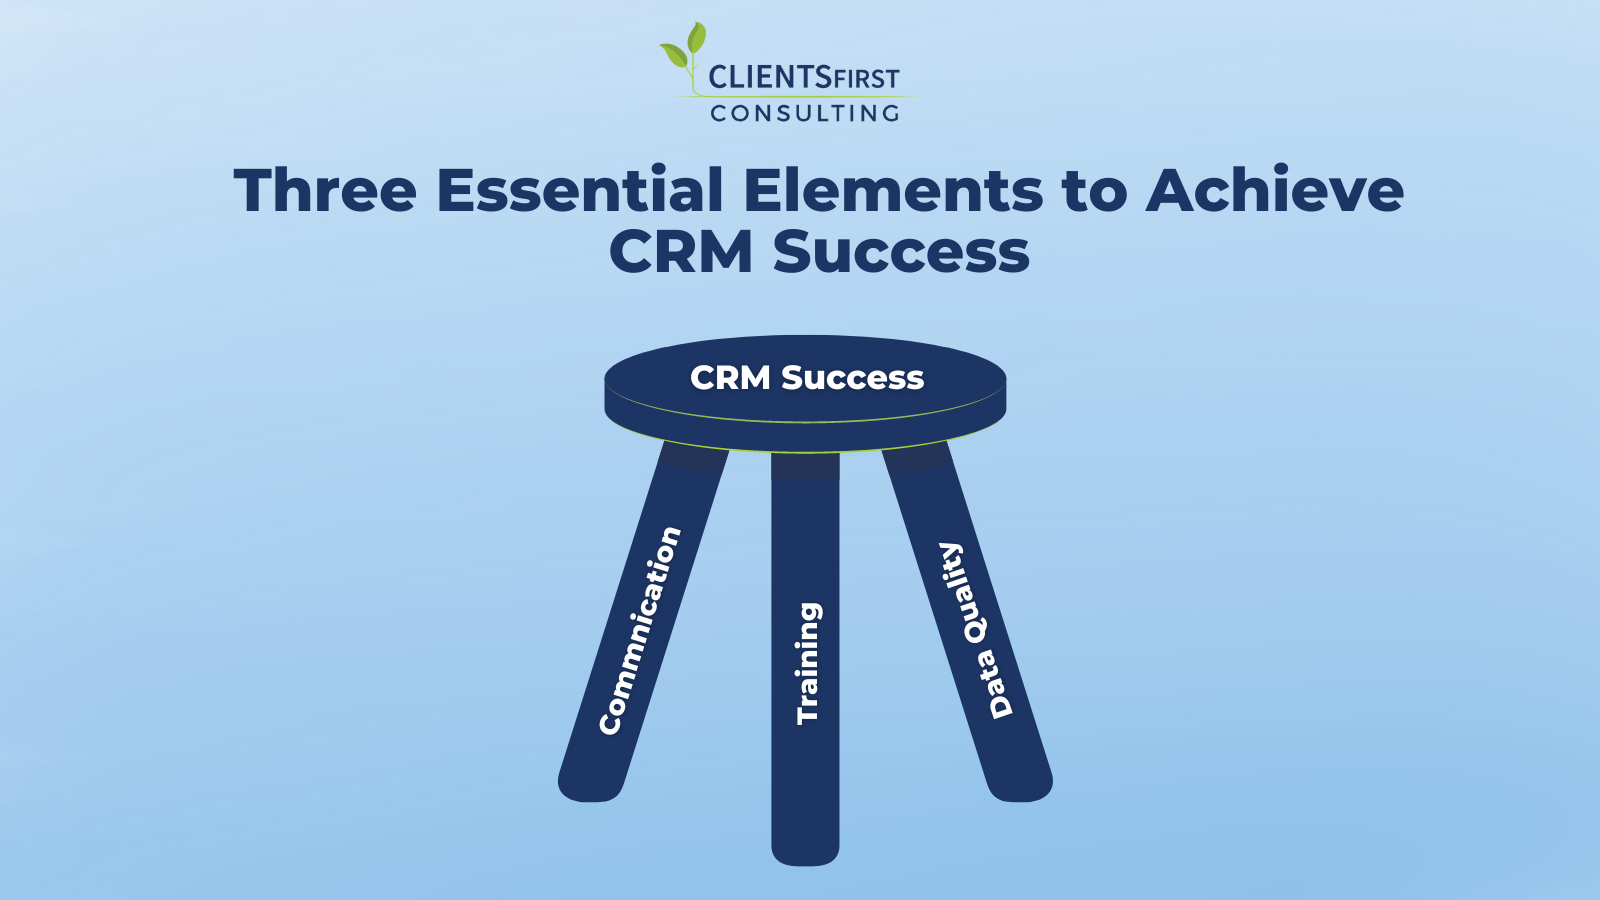 Three Essential Elements To Achieve CRM Success: Communication, Training, Data Quality